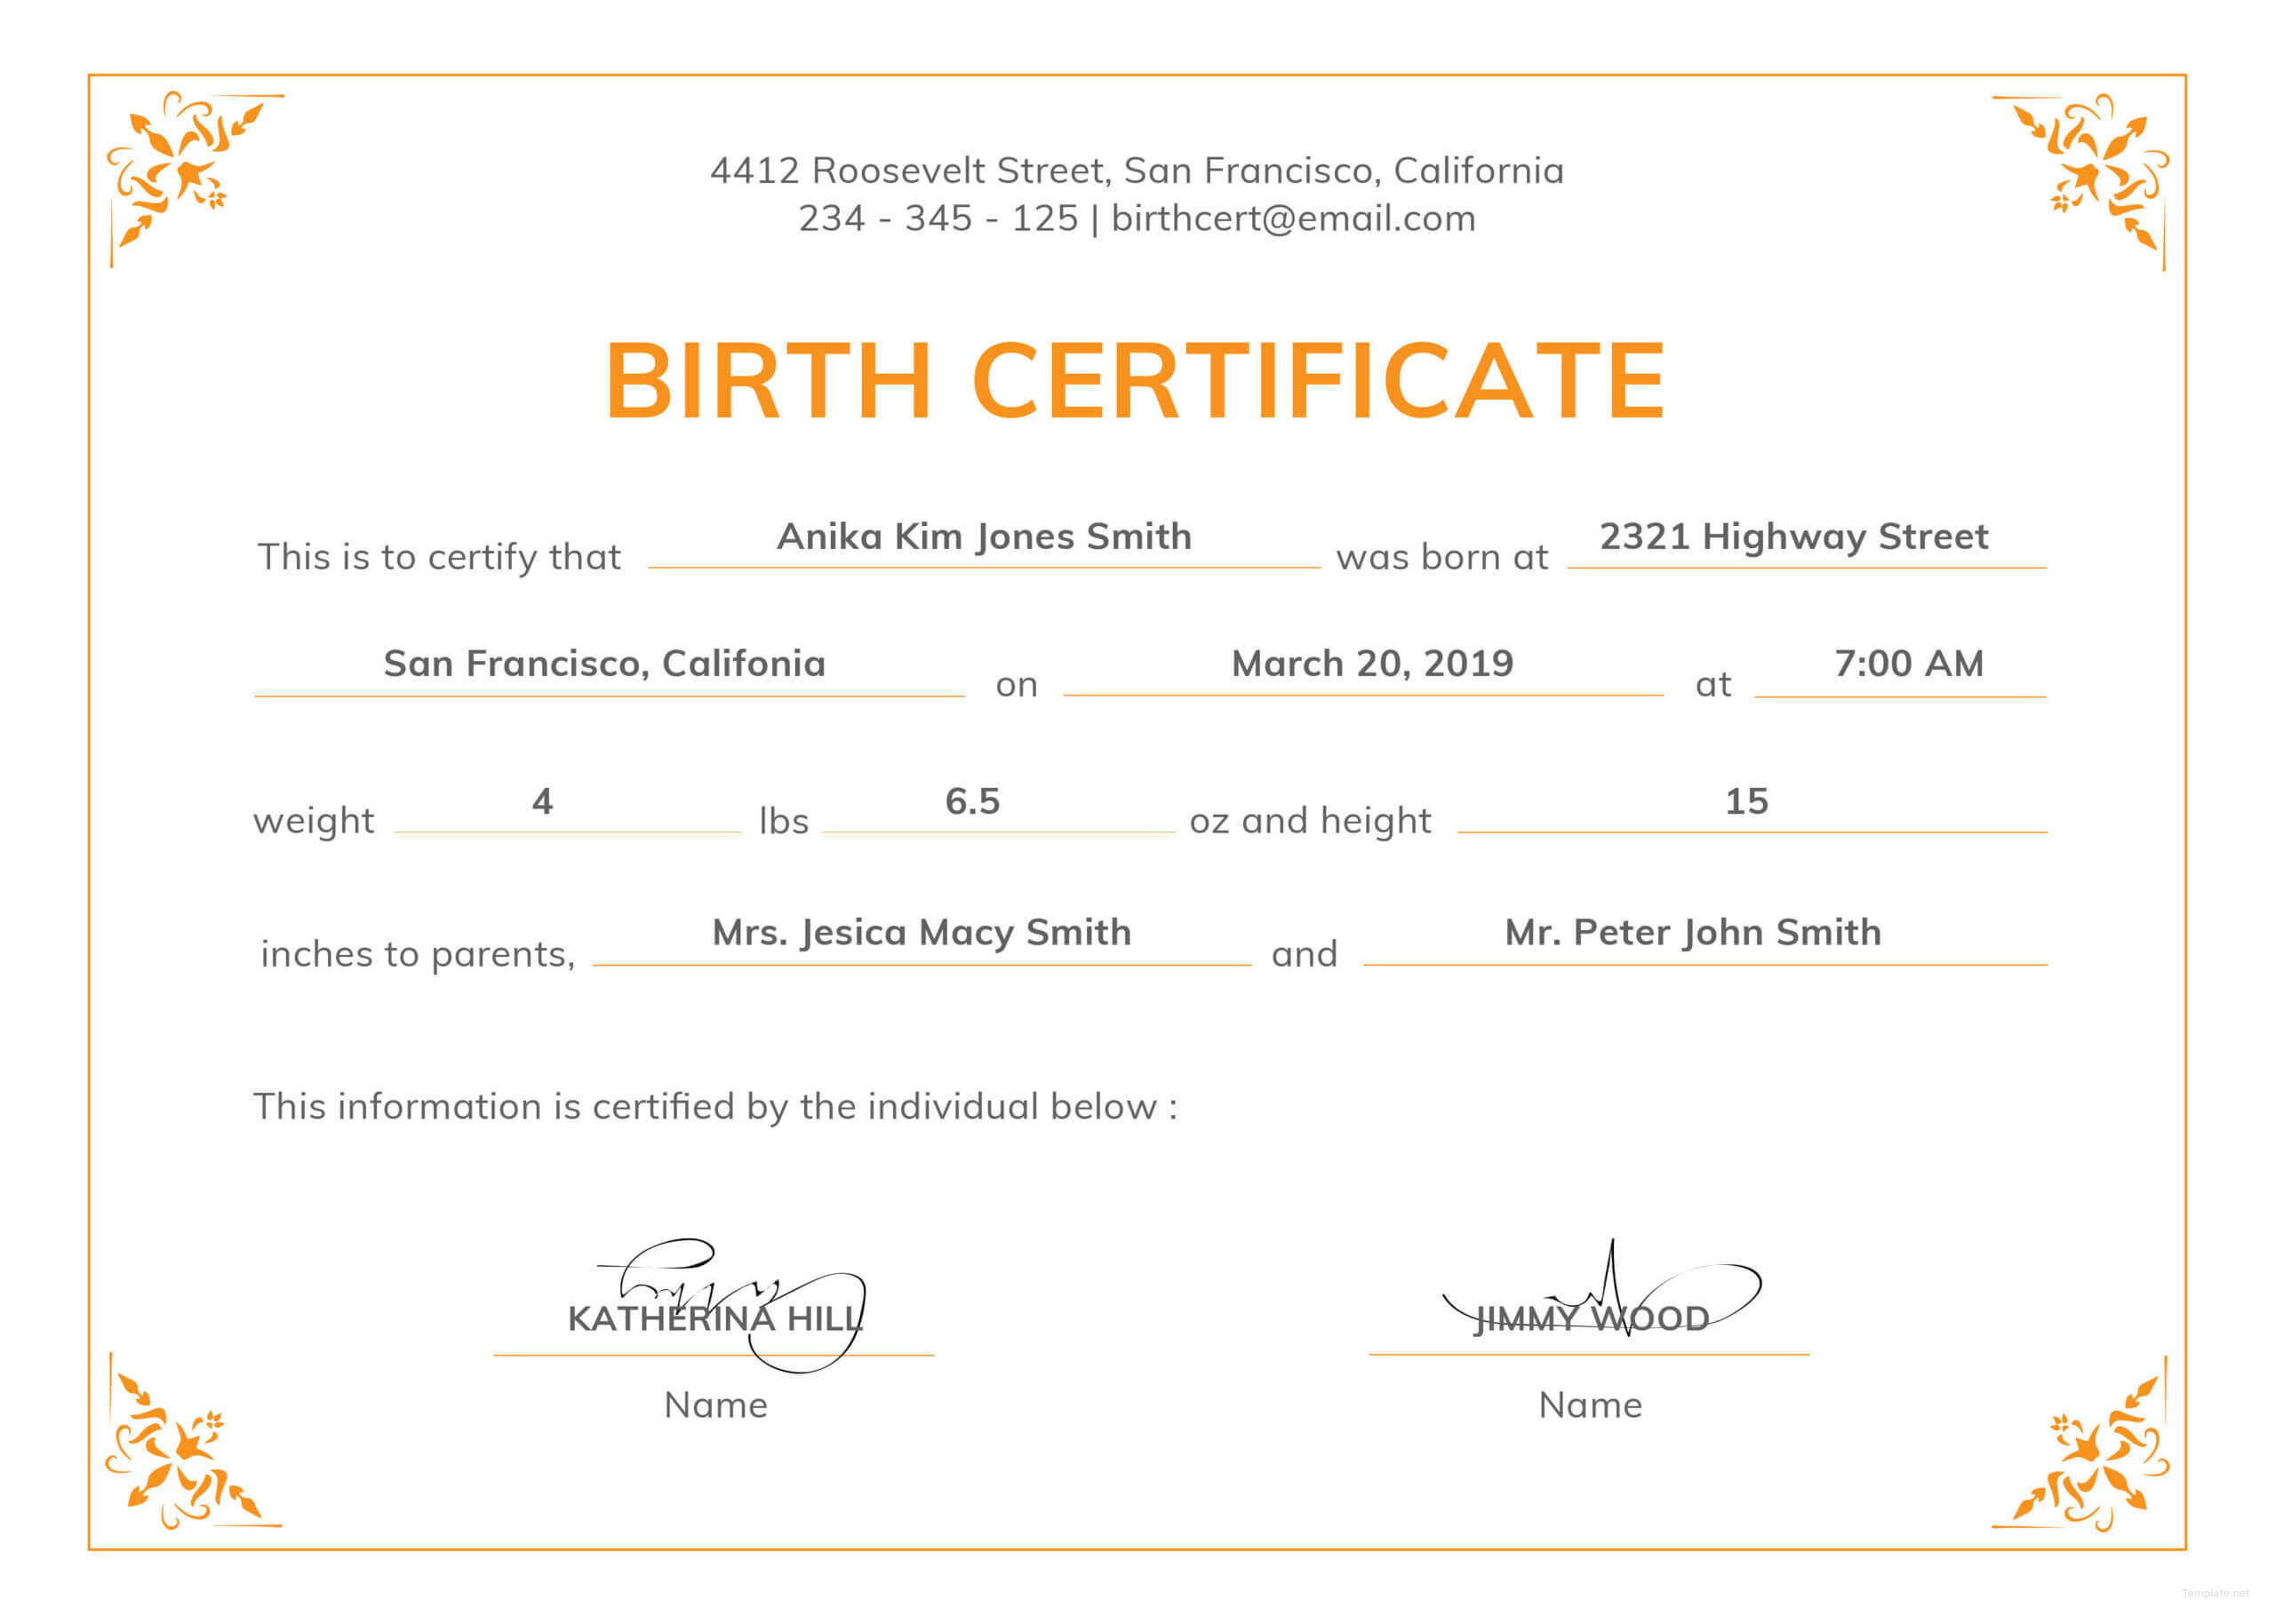 Can Make A Delivery Certificate Crucial | Gift Certificate Throughout Editable Birth Certificate Template